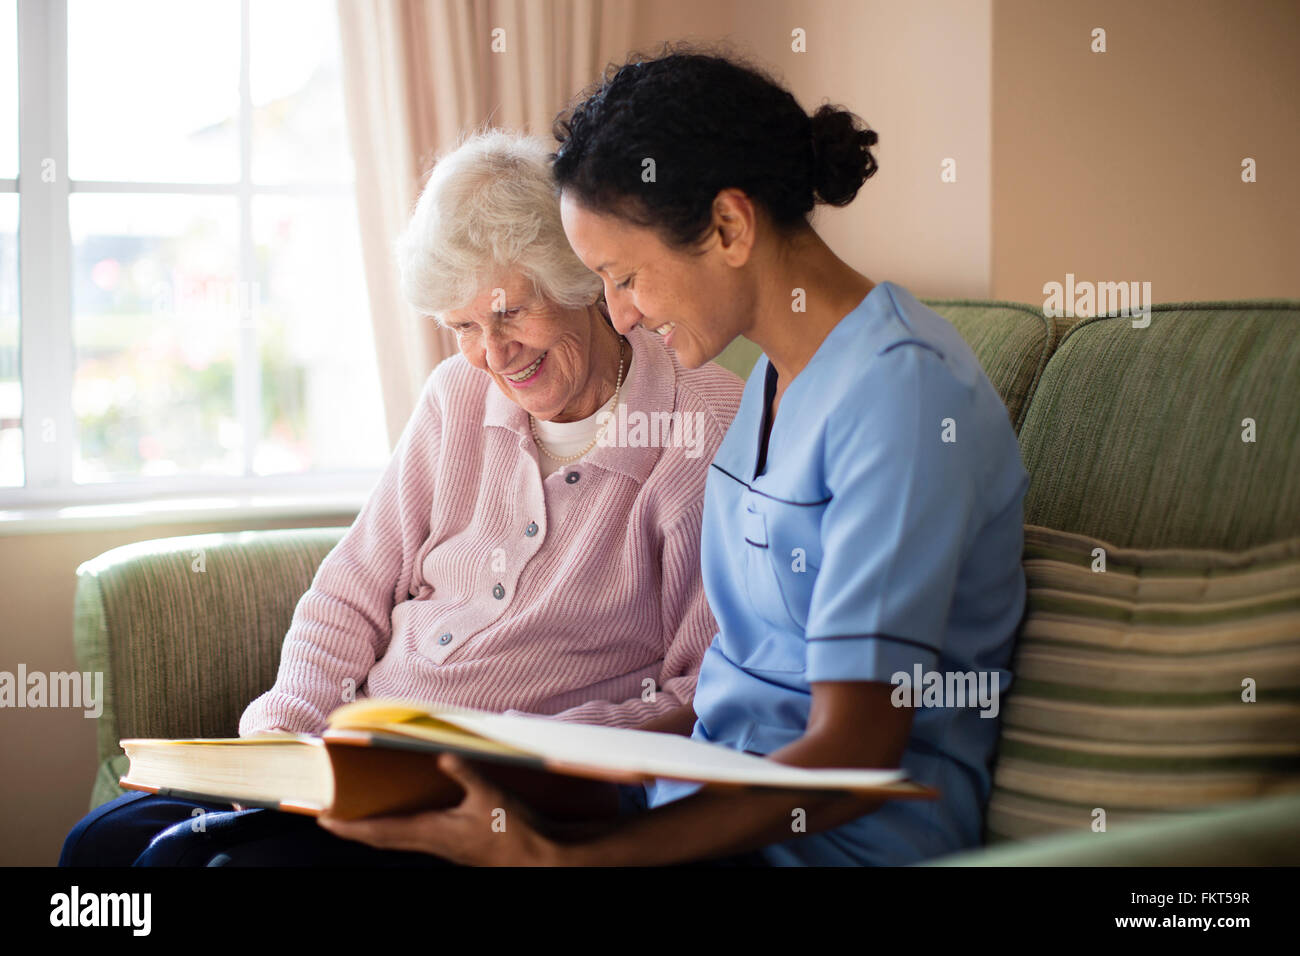 Nurse and patient looking at photo album Stock Photo